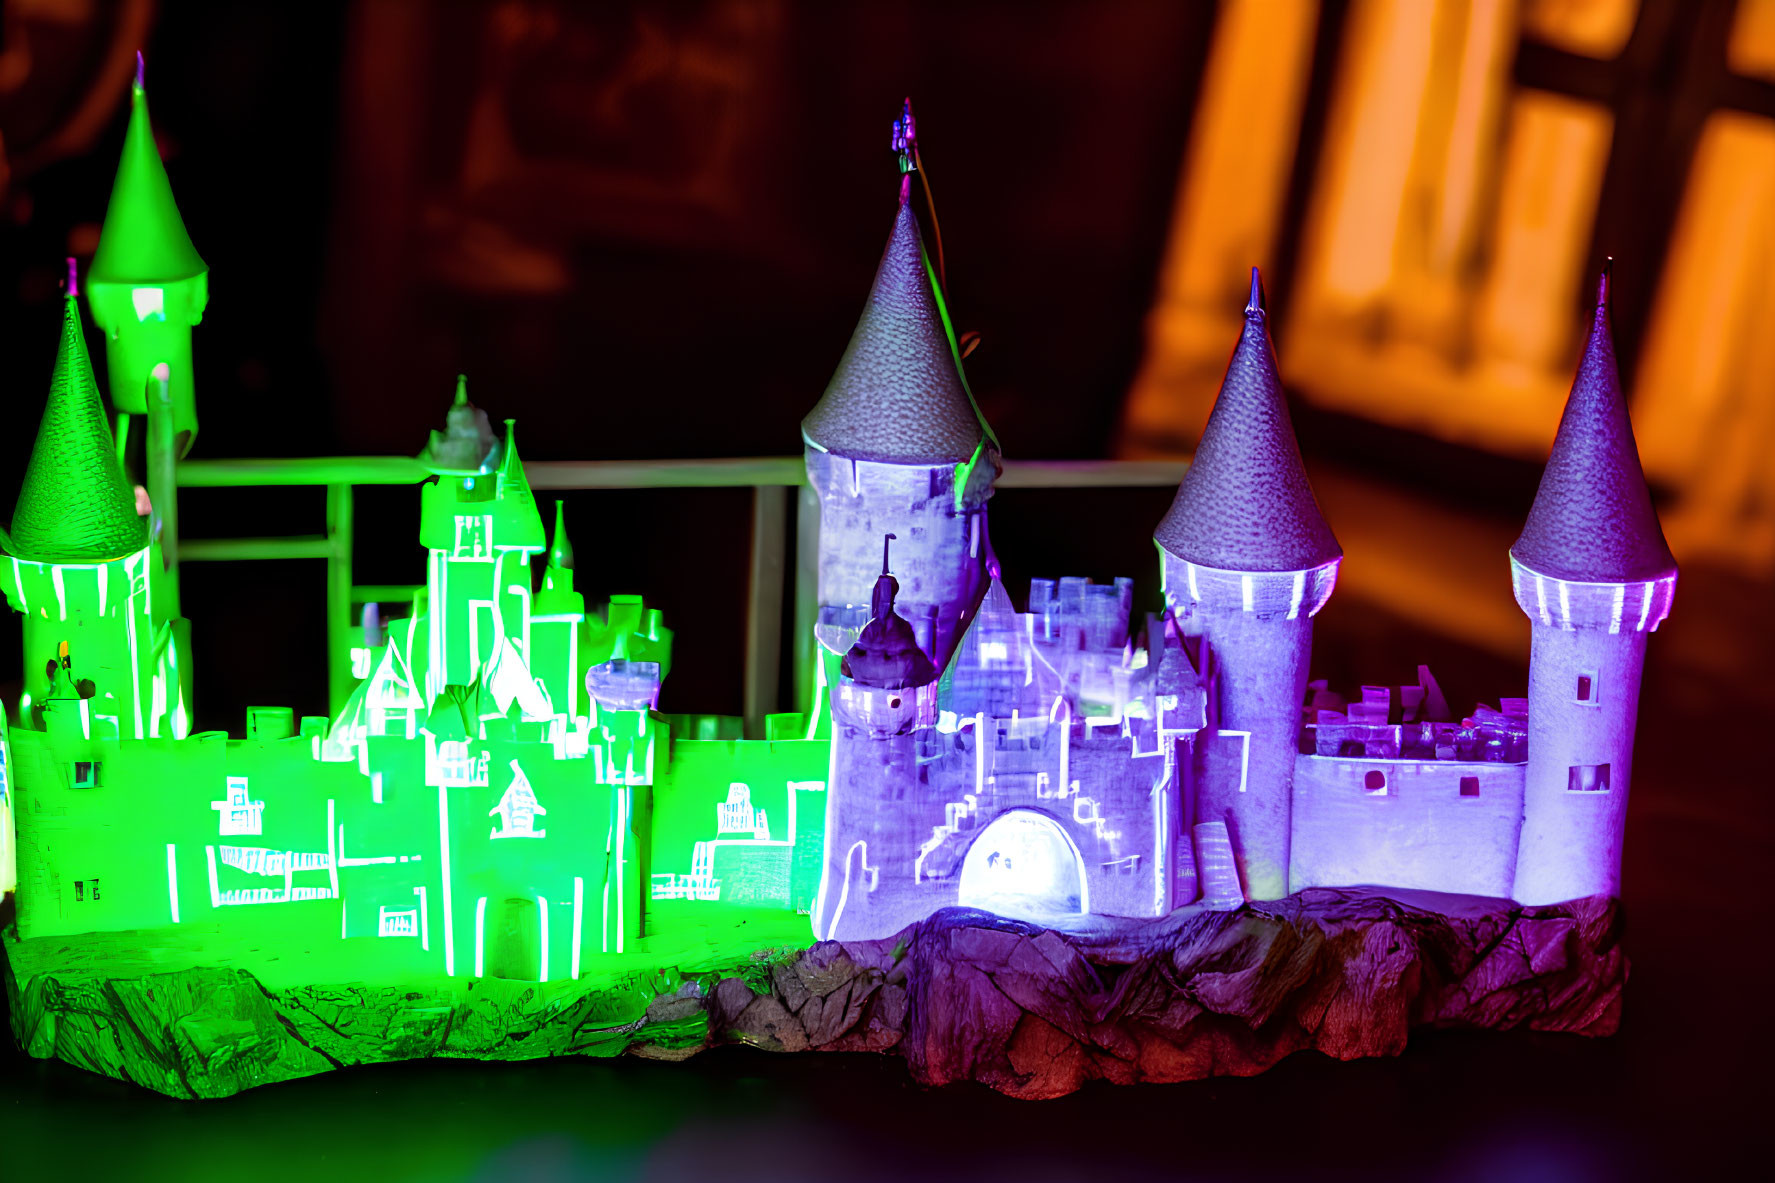 Miniature castle with vibrant green and purple lighting on dark background